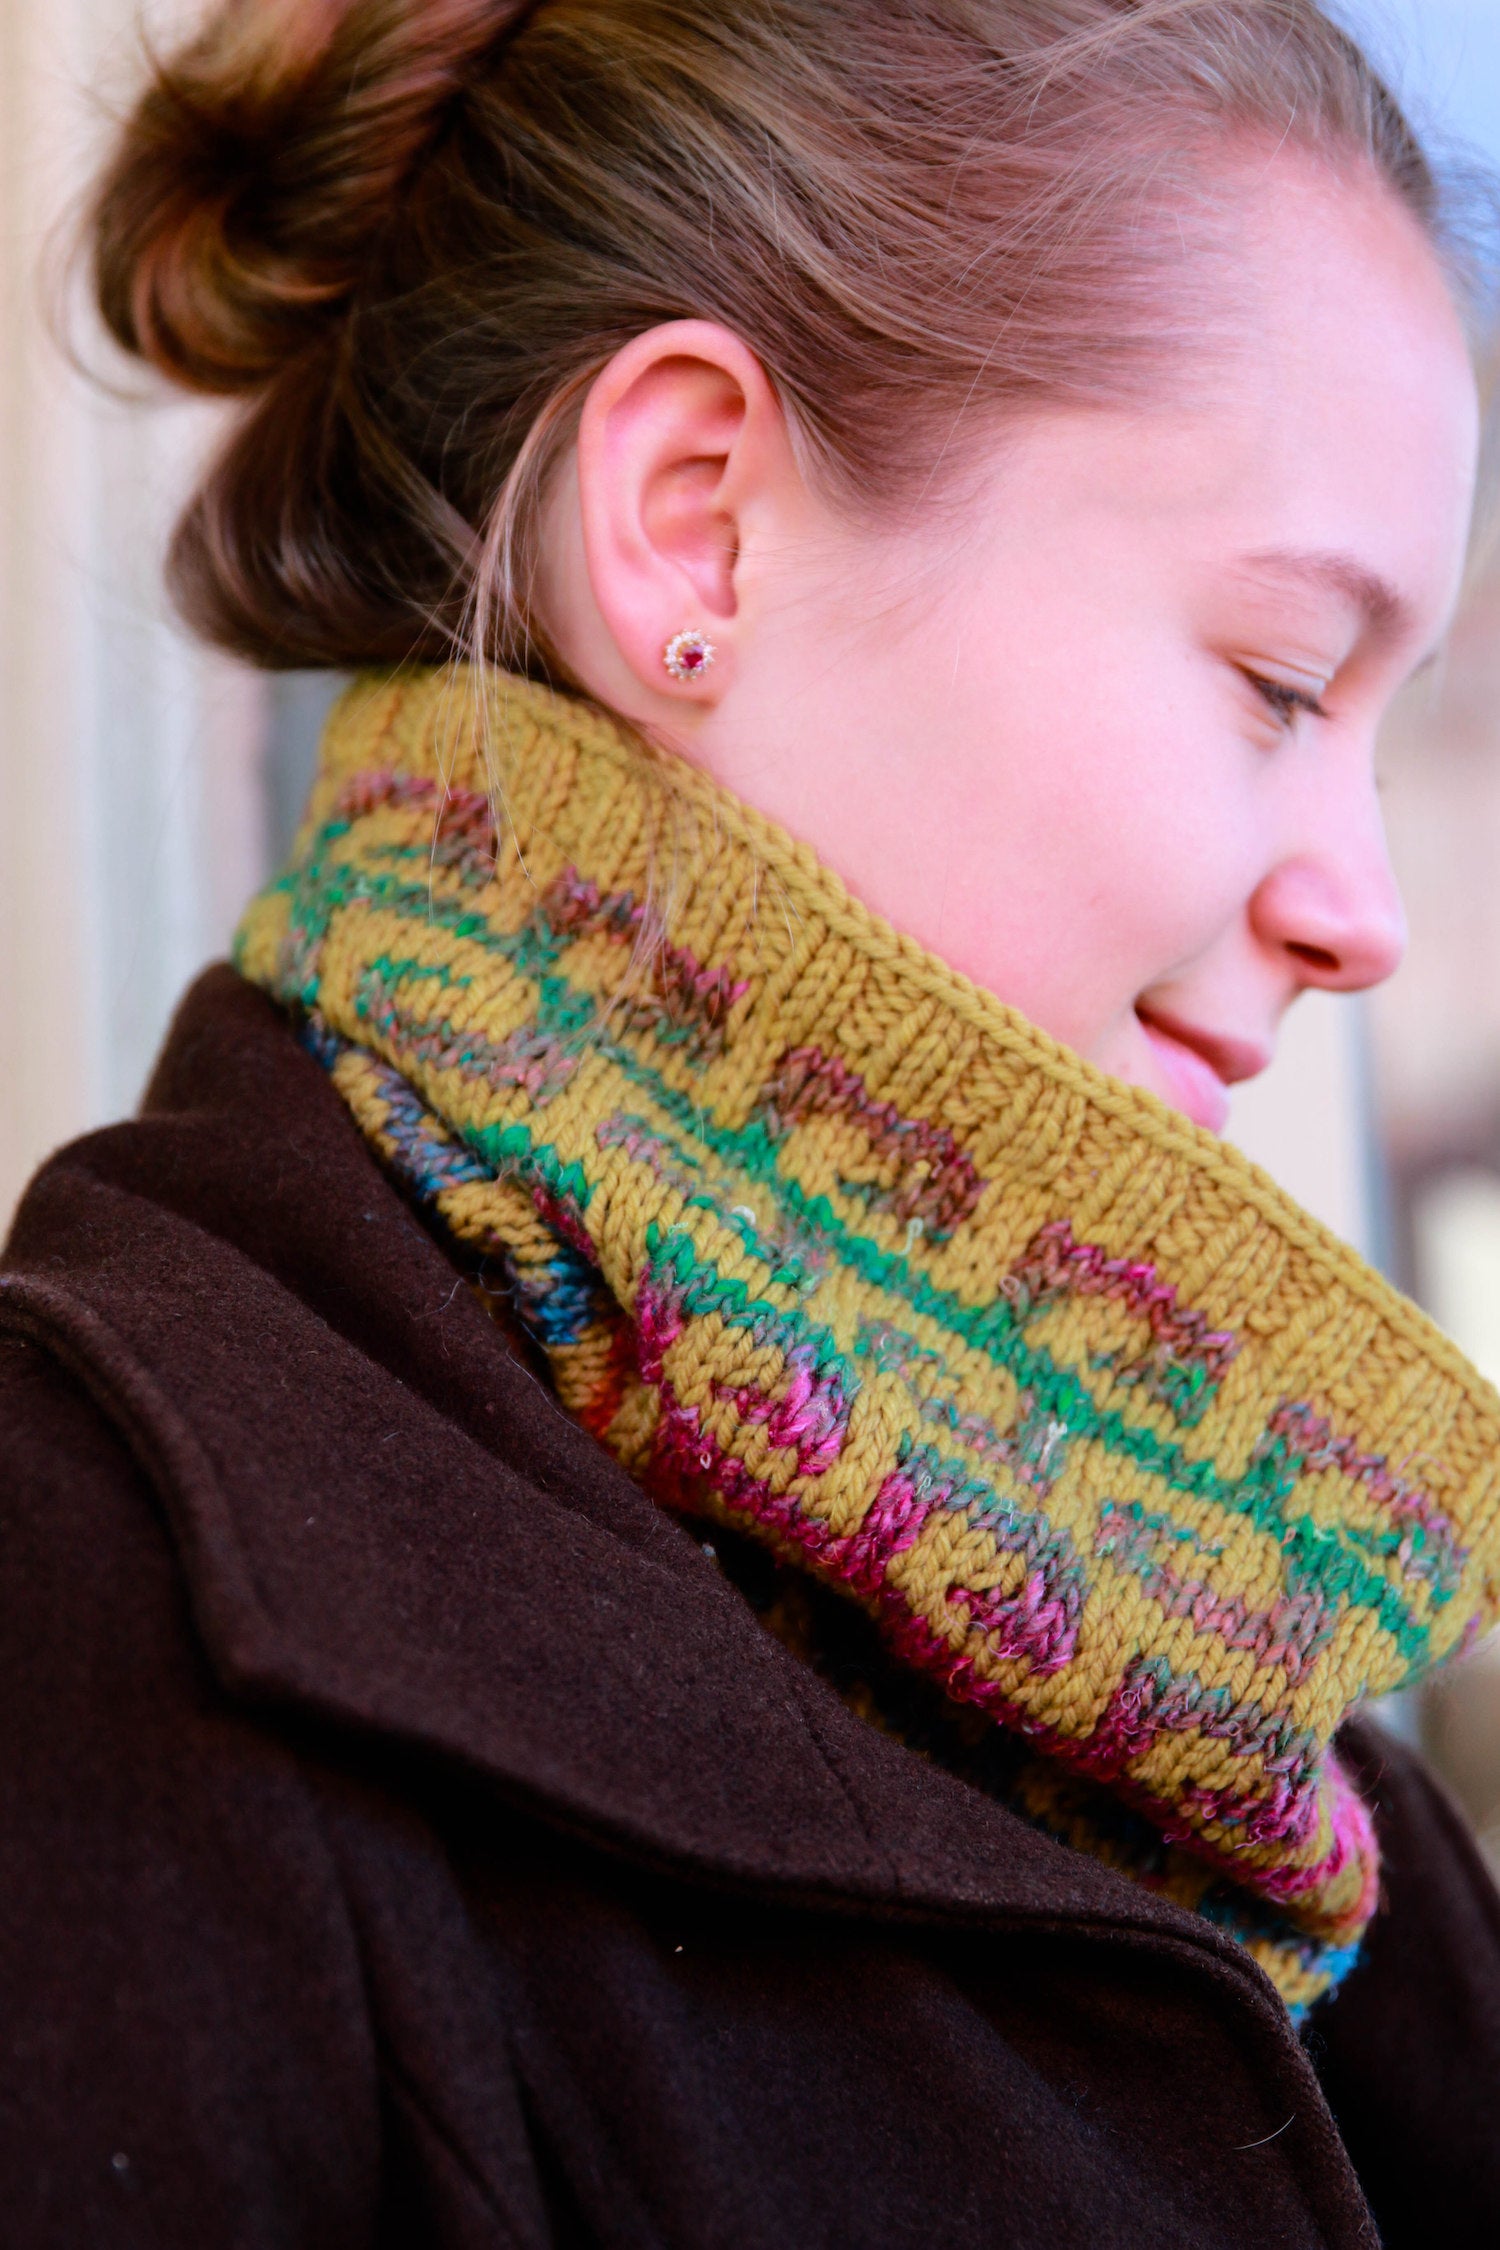 Fretwork Cowl kit from Sweet Shop Patterns